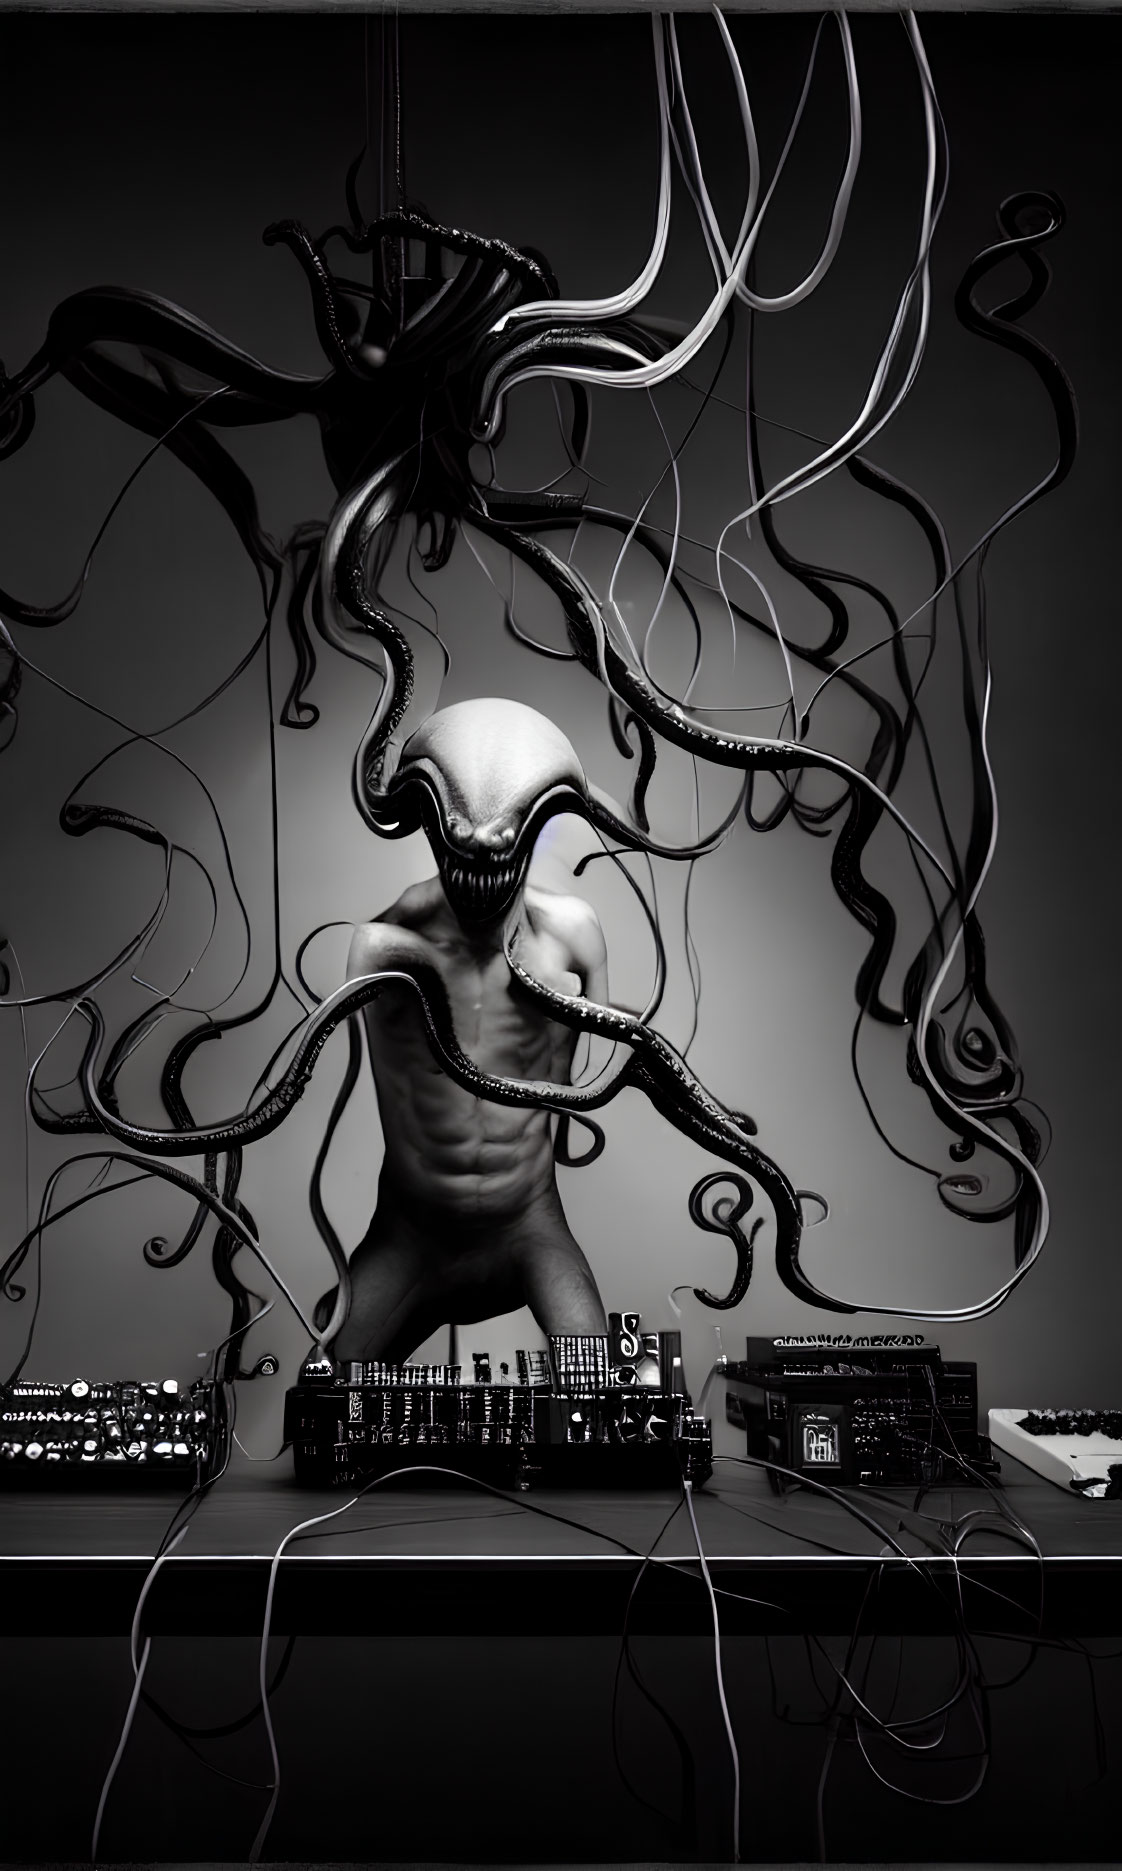 Alien figure with tentacles behind electronic music equipment in monochromatic setup